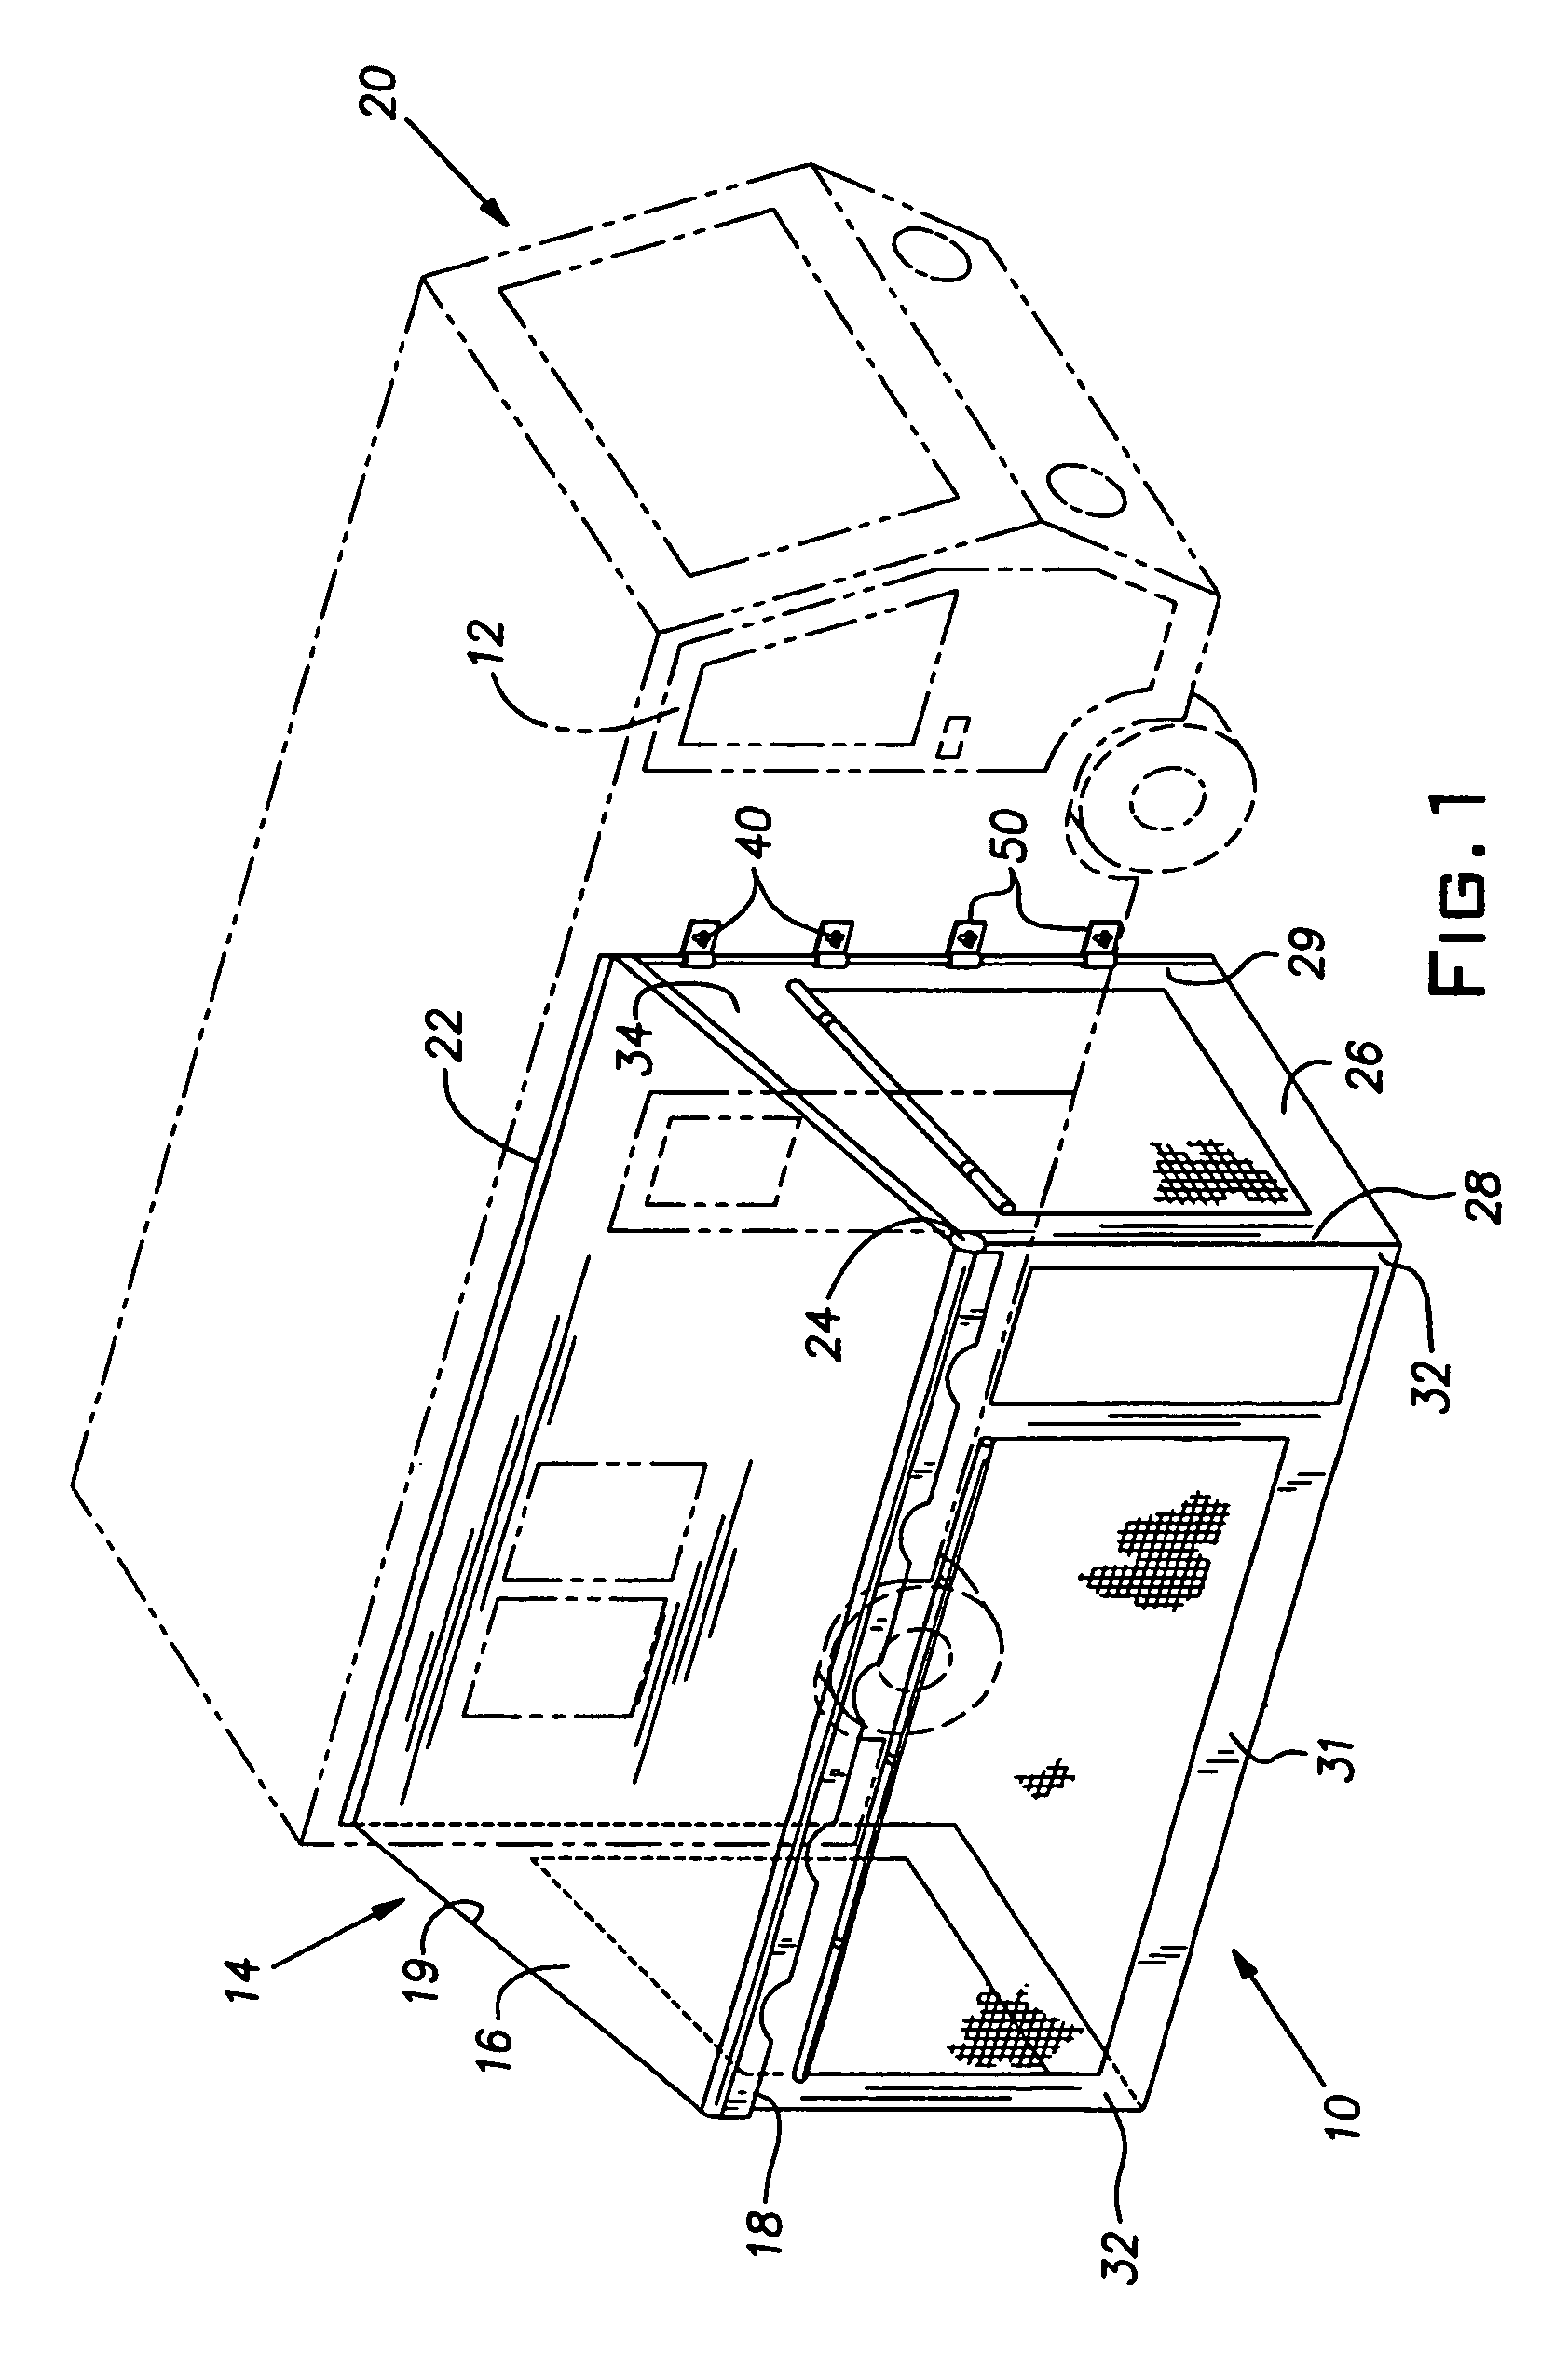 Screen room enclosure and method of attachment